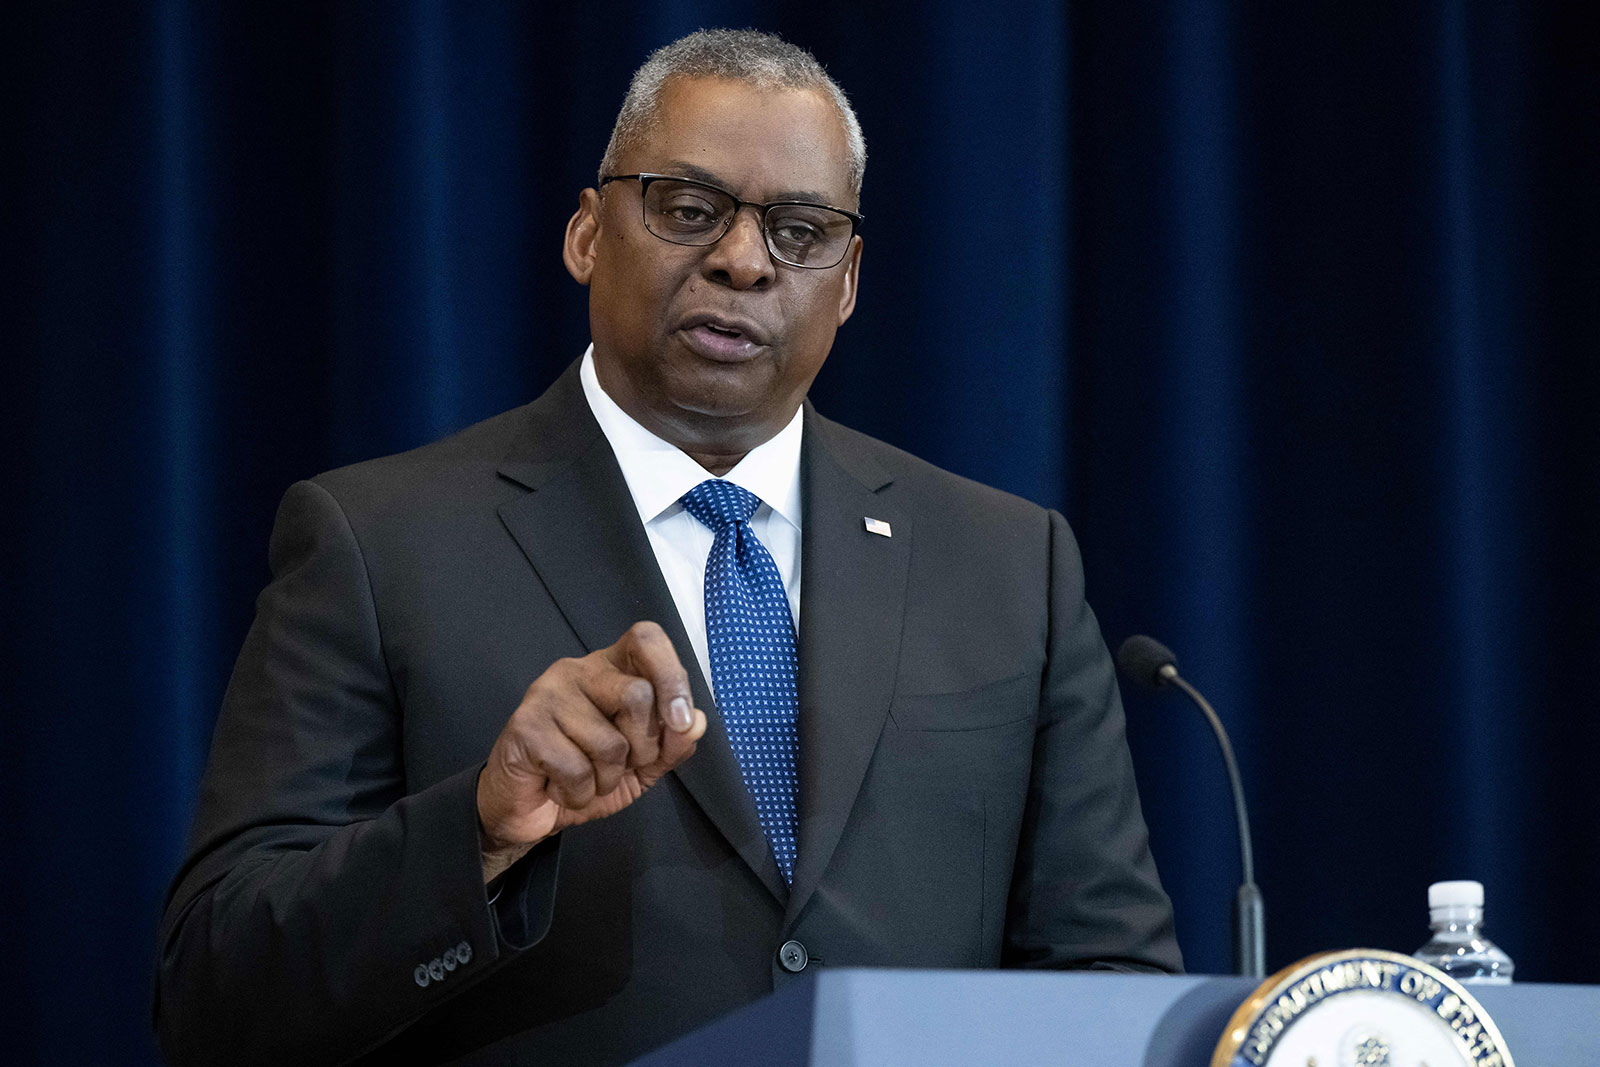 US Defense Secretary Lloyd Austin speaks at a press conference at the State Department in Washington, DC, on December 6.